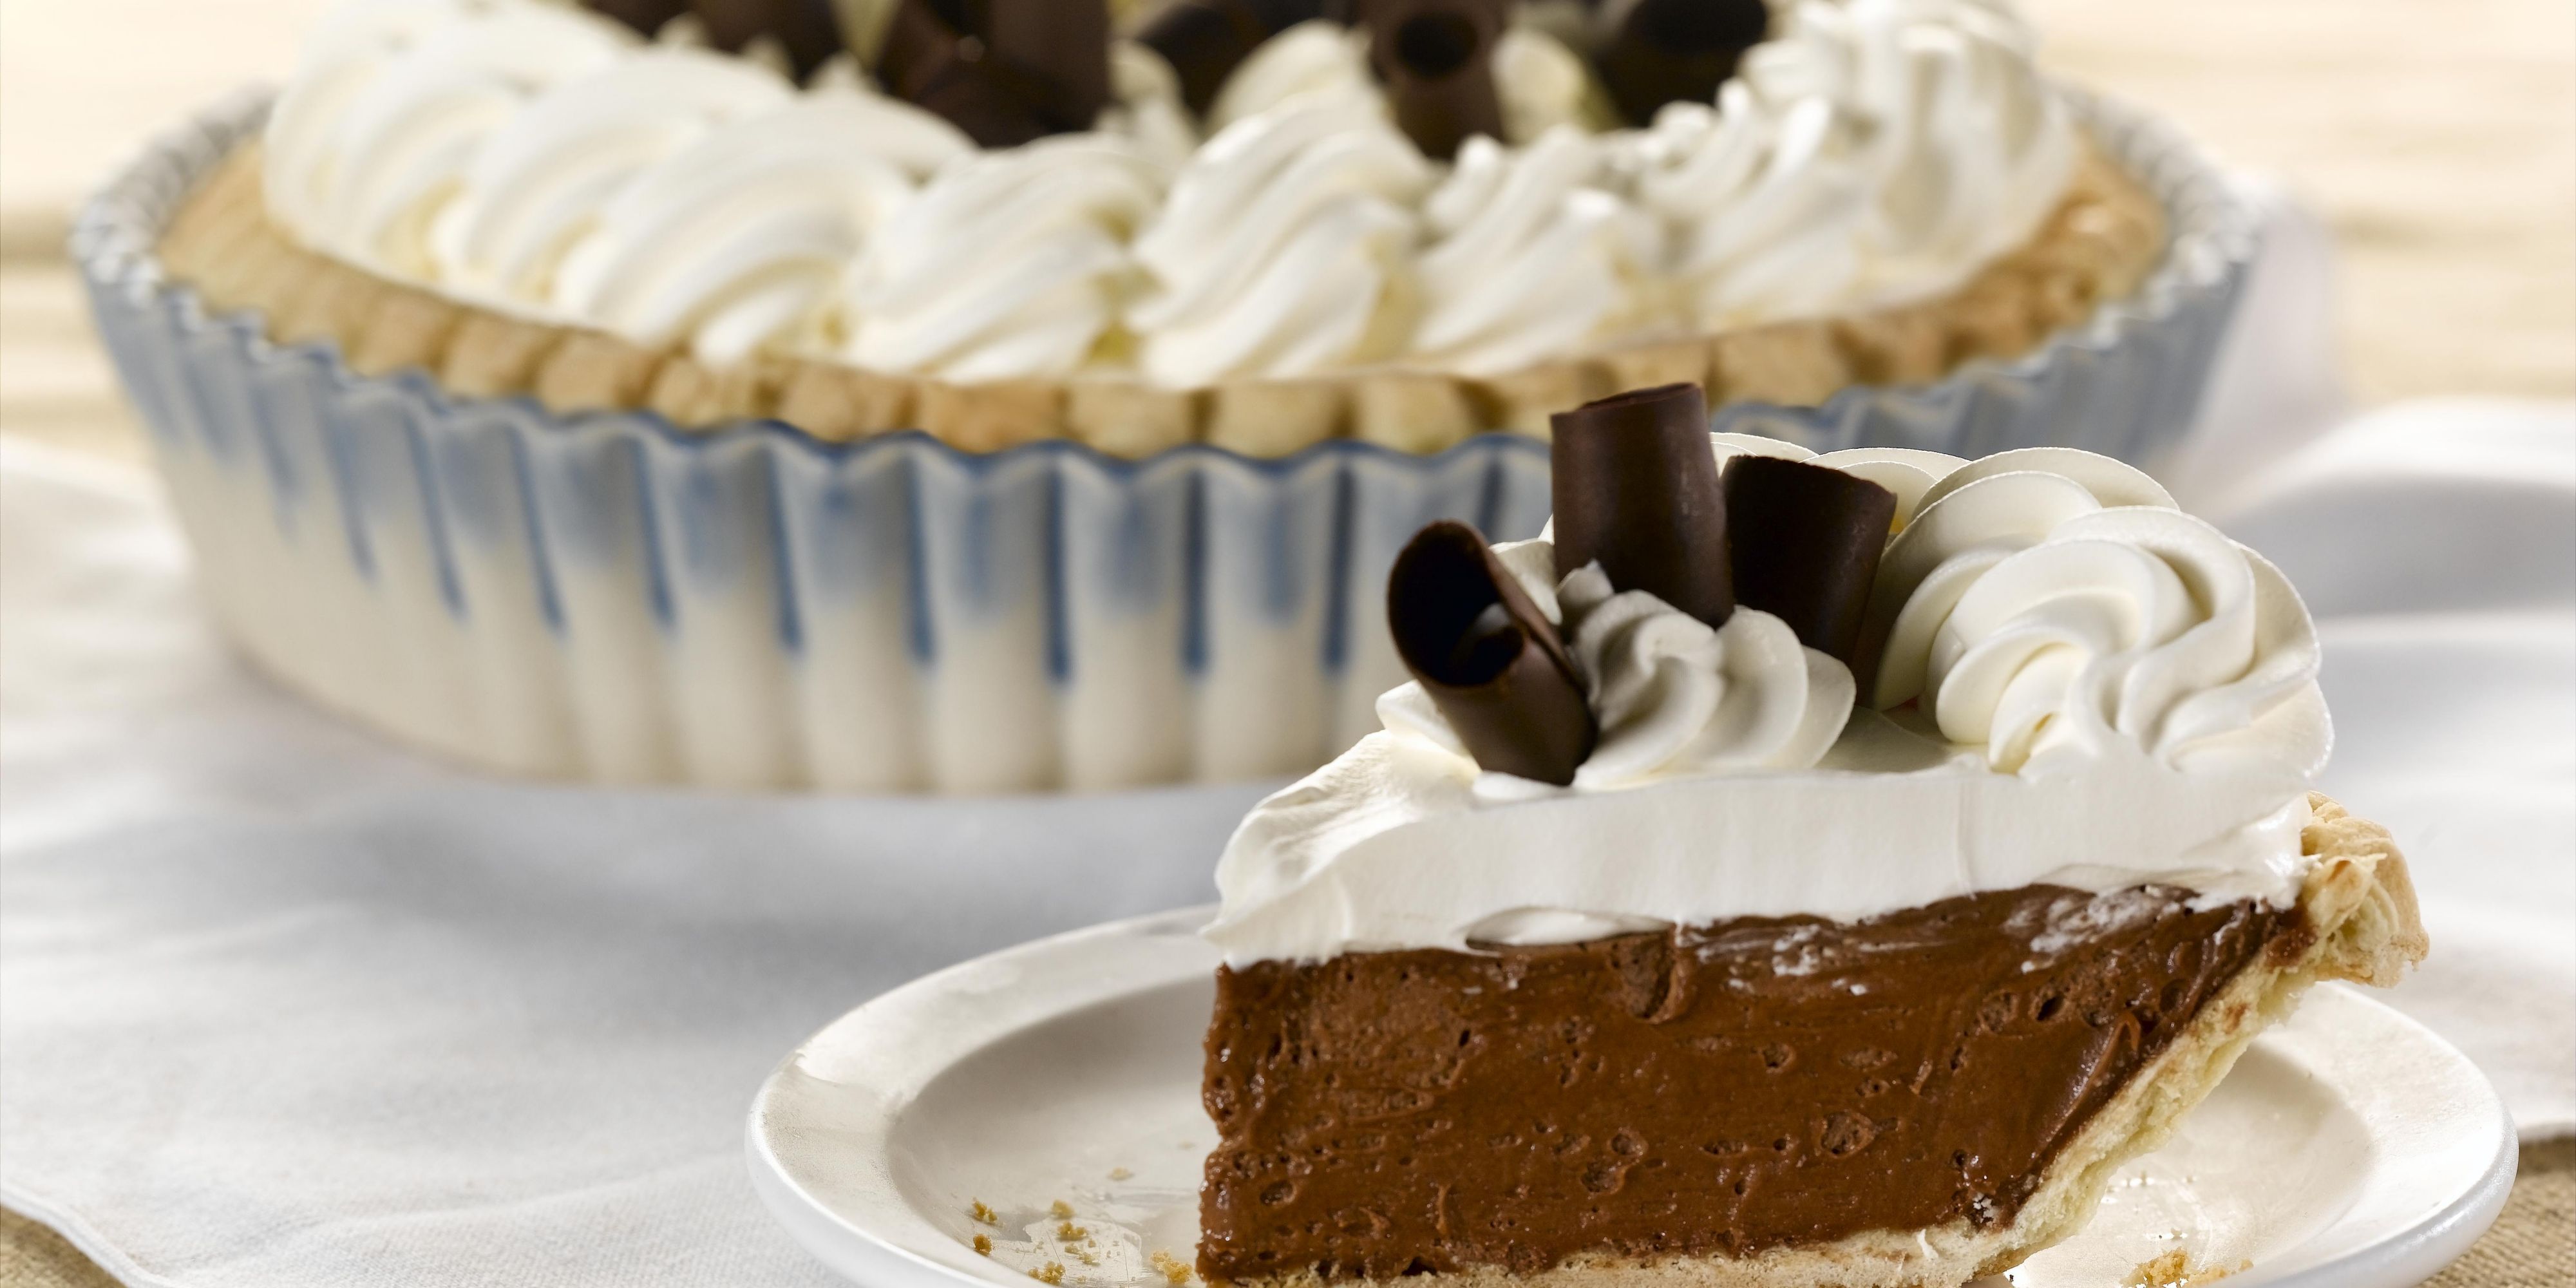 From Our Perkins Bakery - Enjoy a Slice of Chocolate French Silk